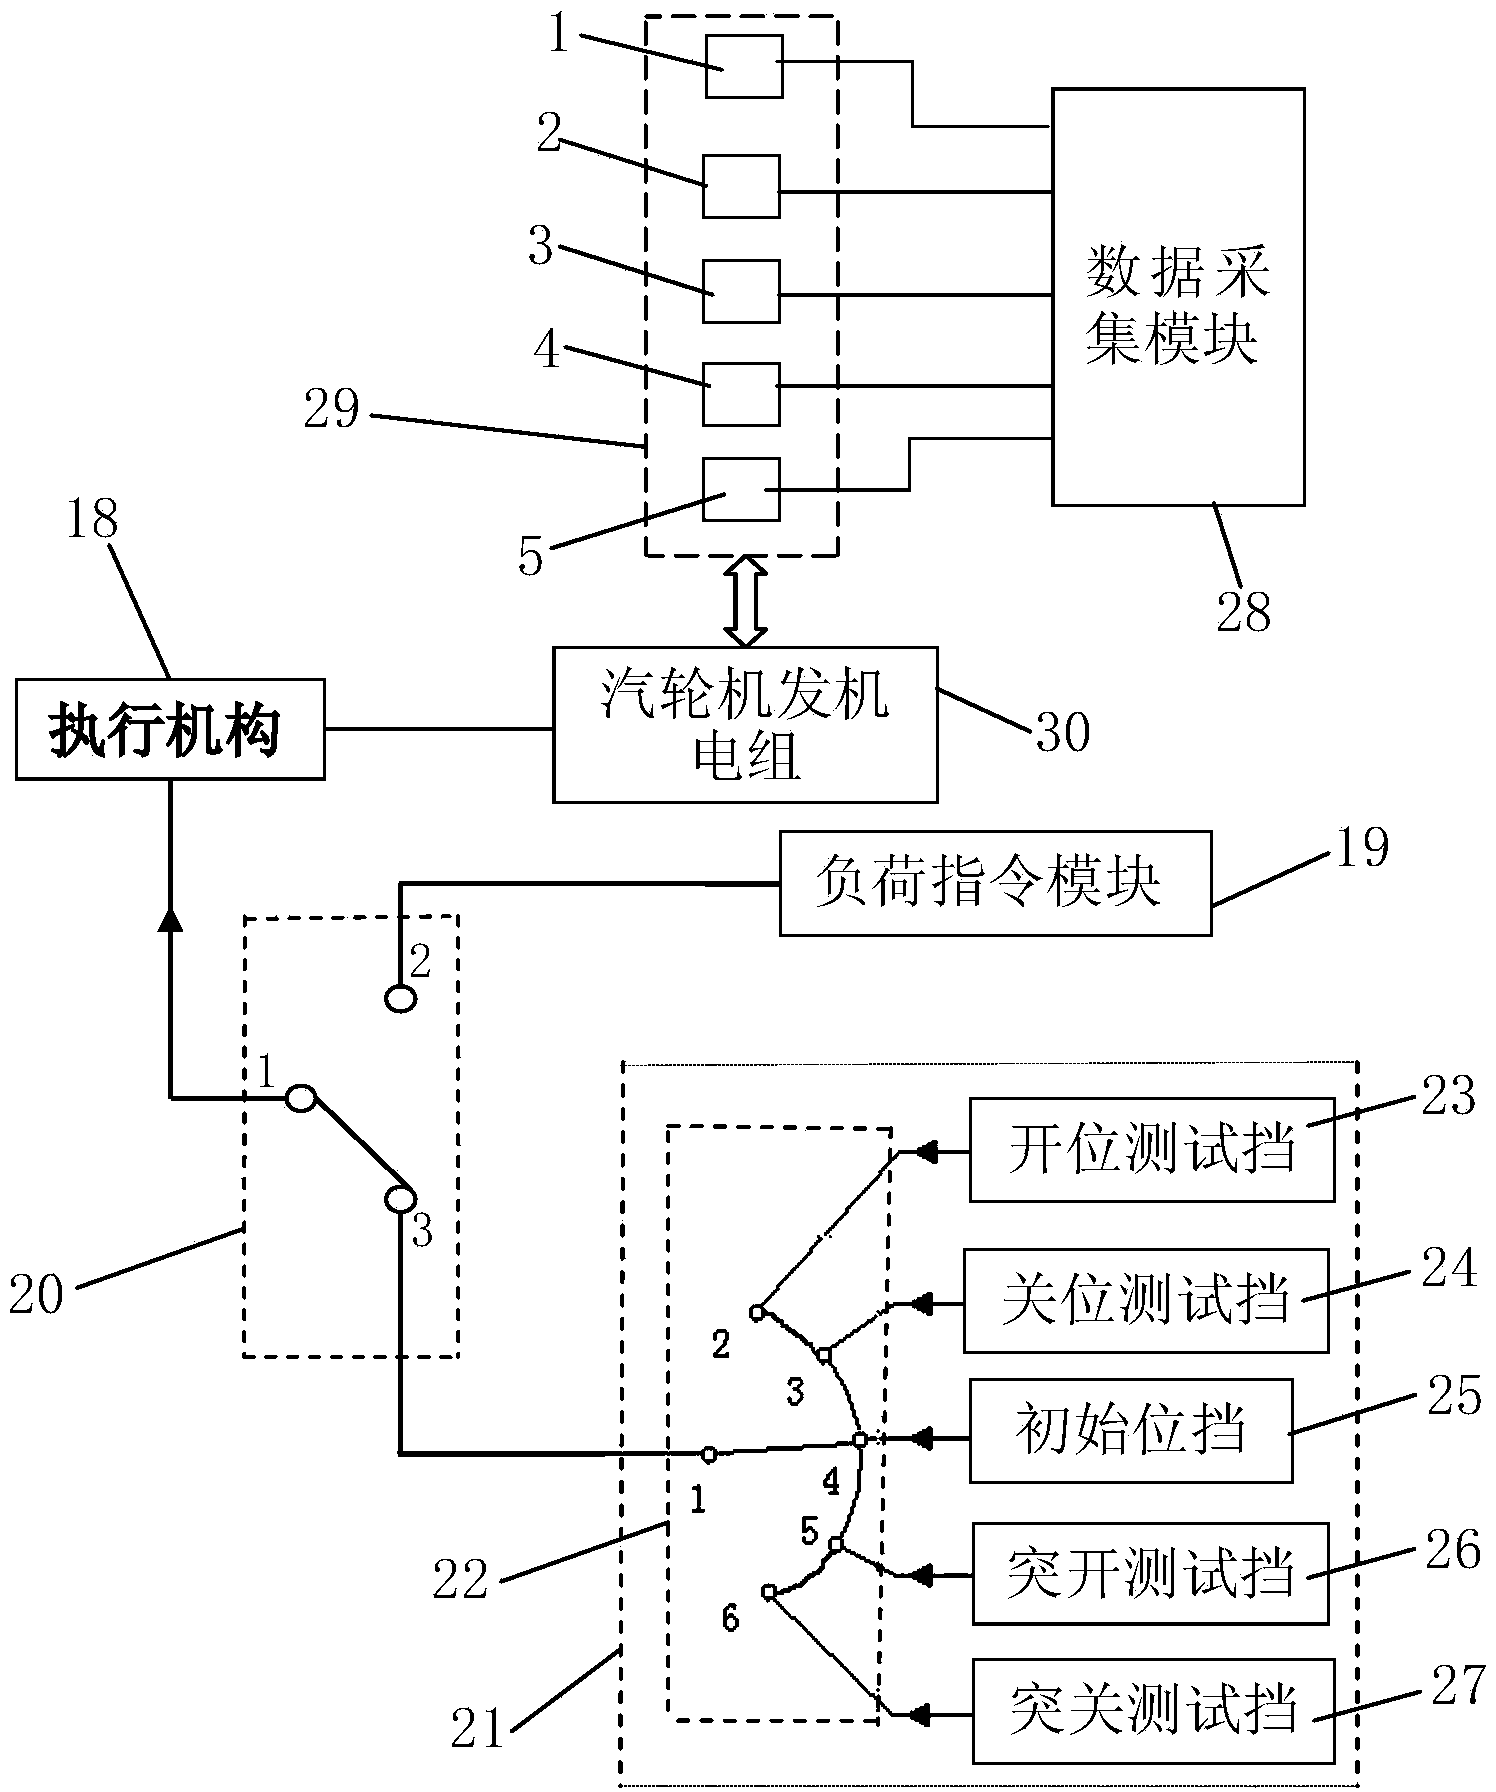 System and method for testing large steam turbine volume time constant